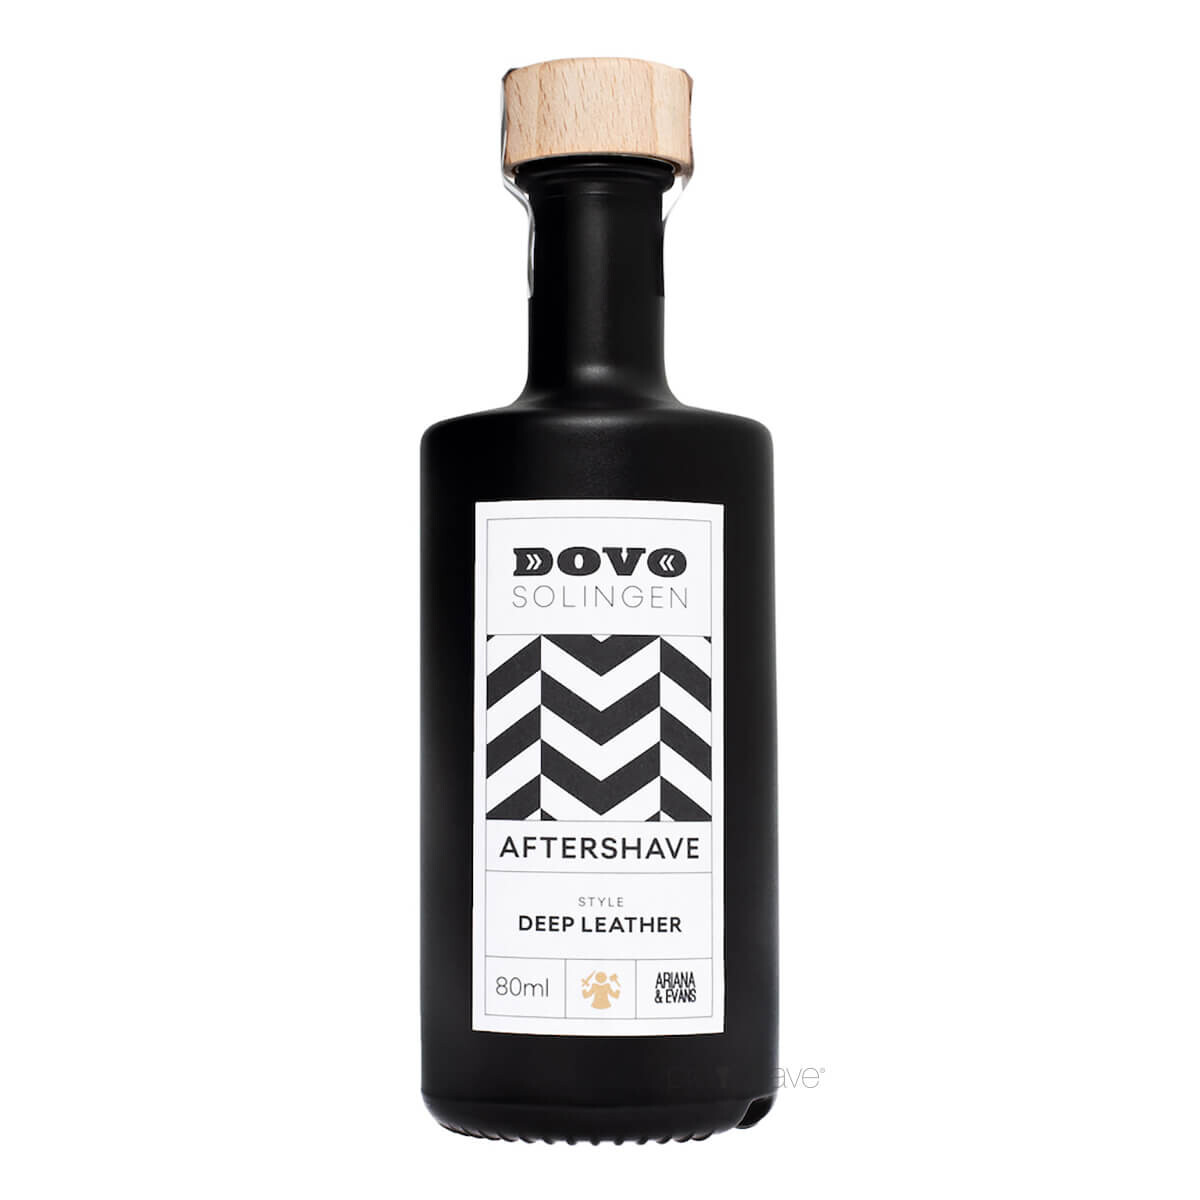 Dovo Aftershave, Deep Leather, 80 ml.